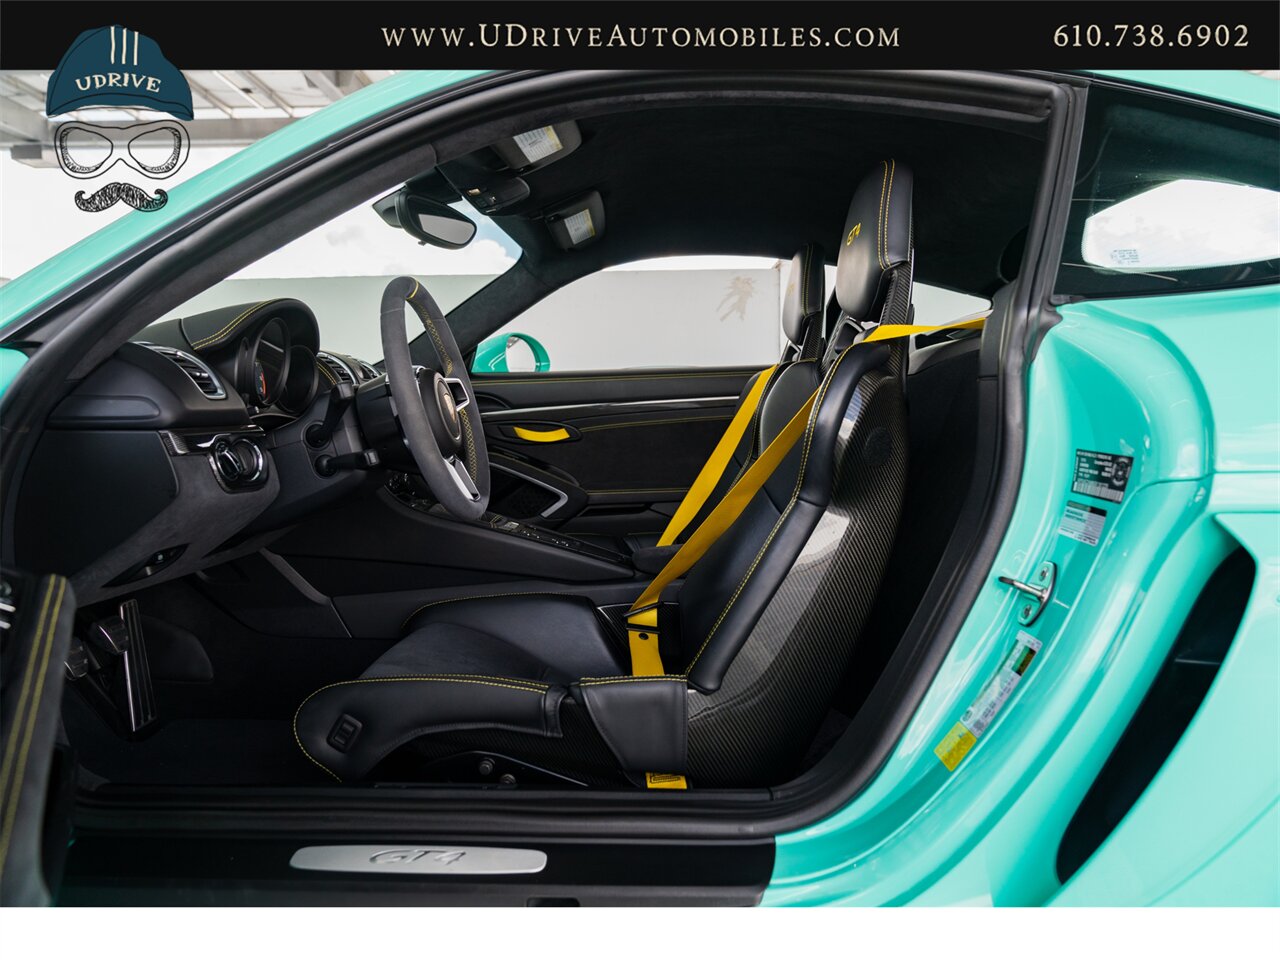 2016 Porsche Cayman GT4  PTS Mint Green 1 of 2 PCCB Bucket Seats PPF - Photo 29 - West Chester, PA 19382